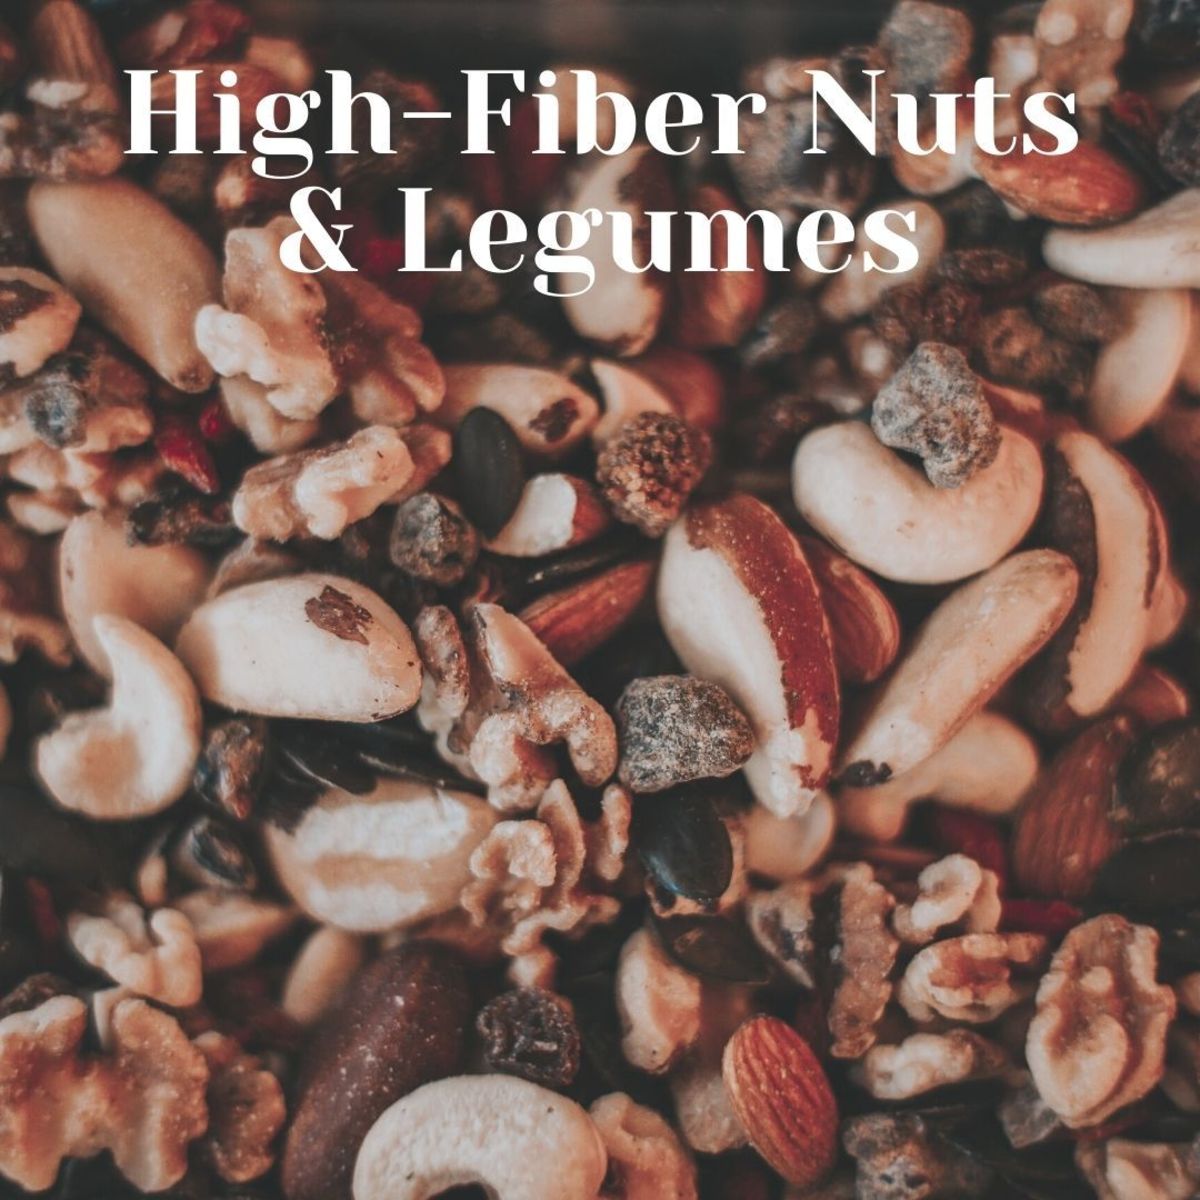 Nuts and legumes, such as lentils and black beans, are high in fiber.